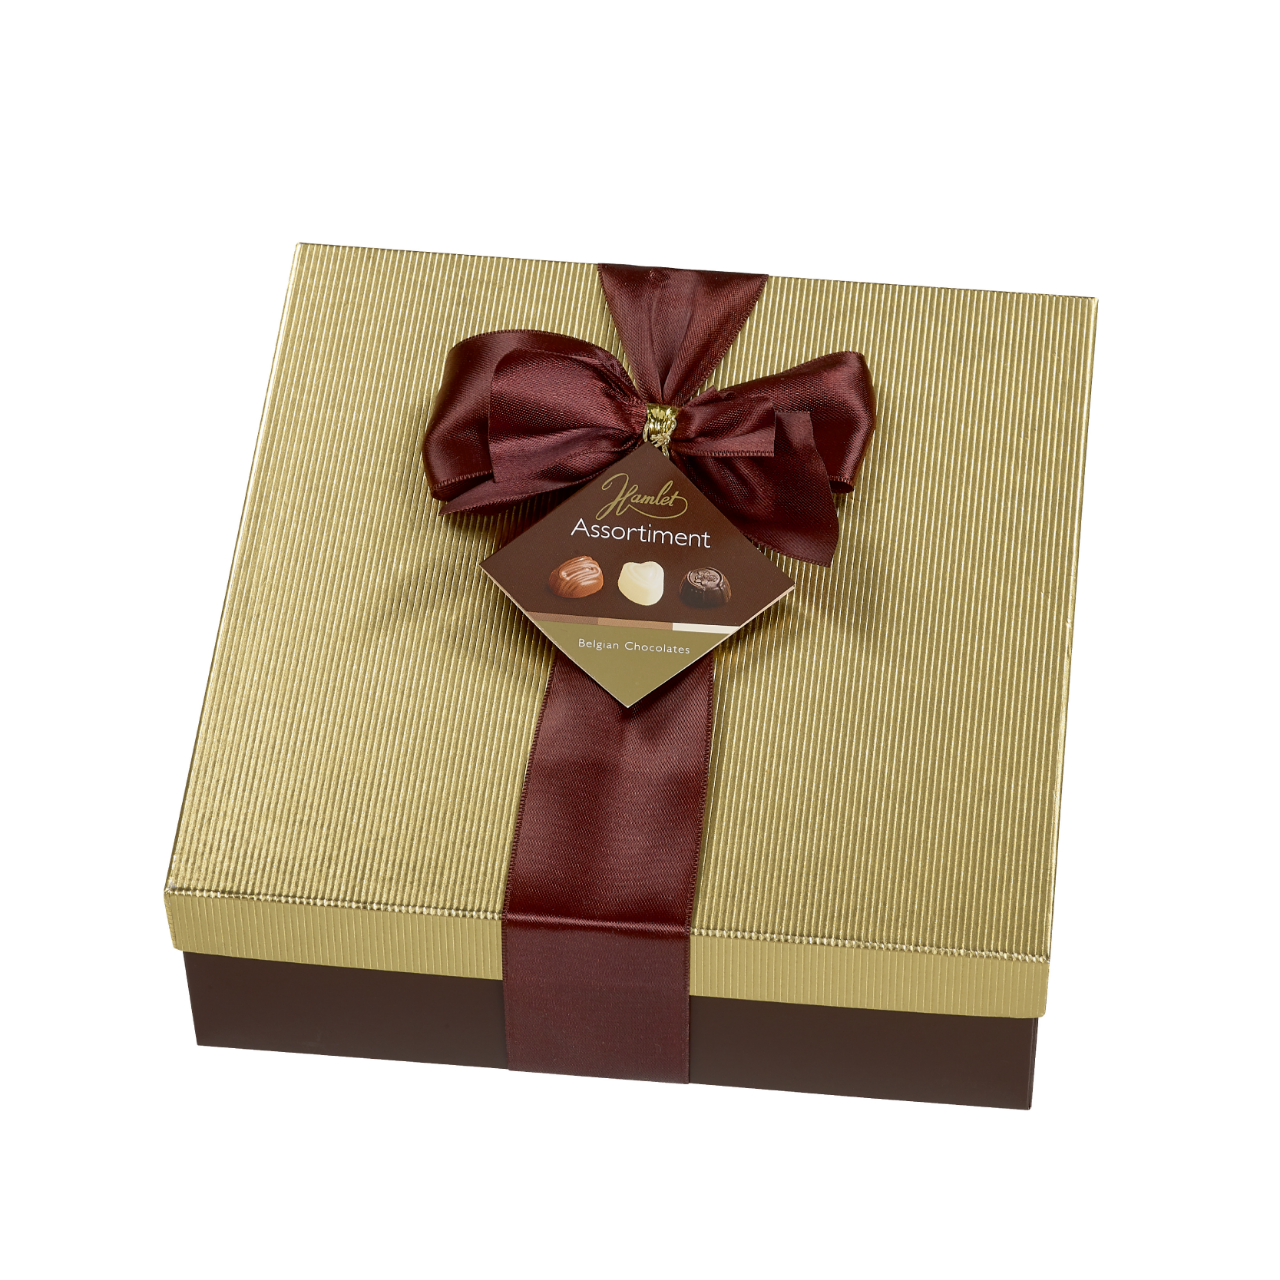 Chocolate Gift Boxes  World Wide Chocolate